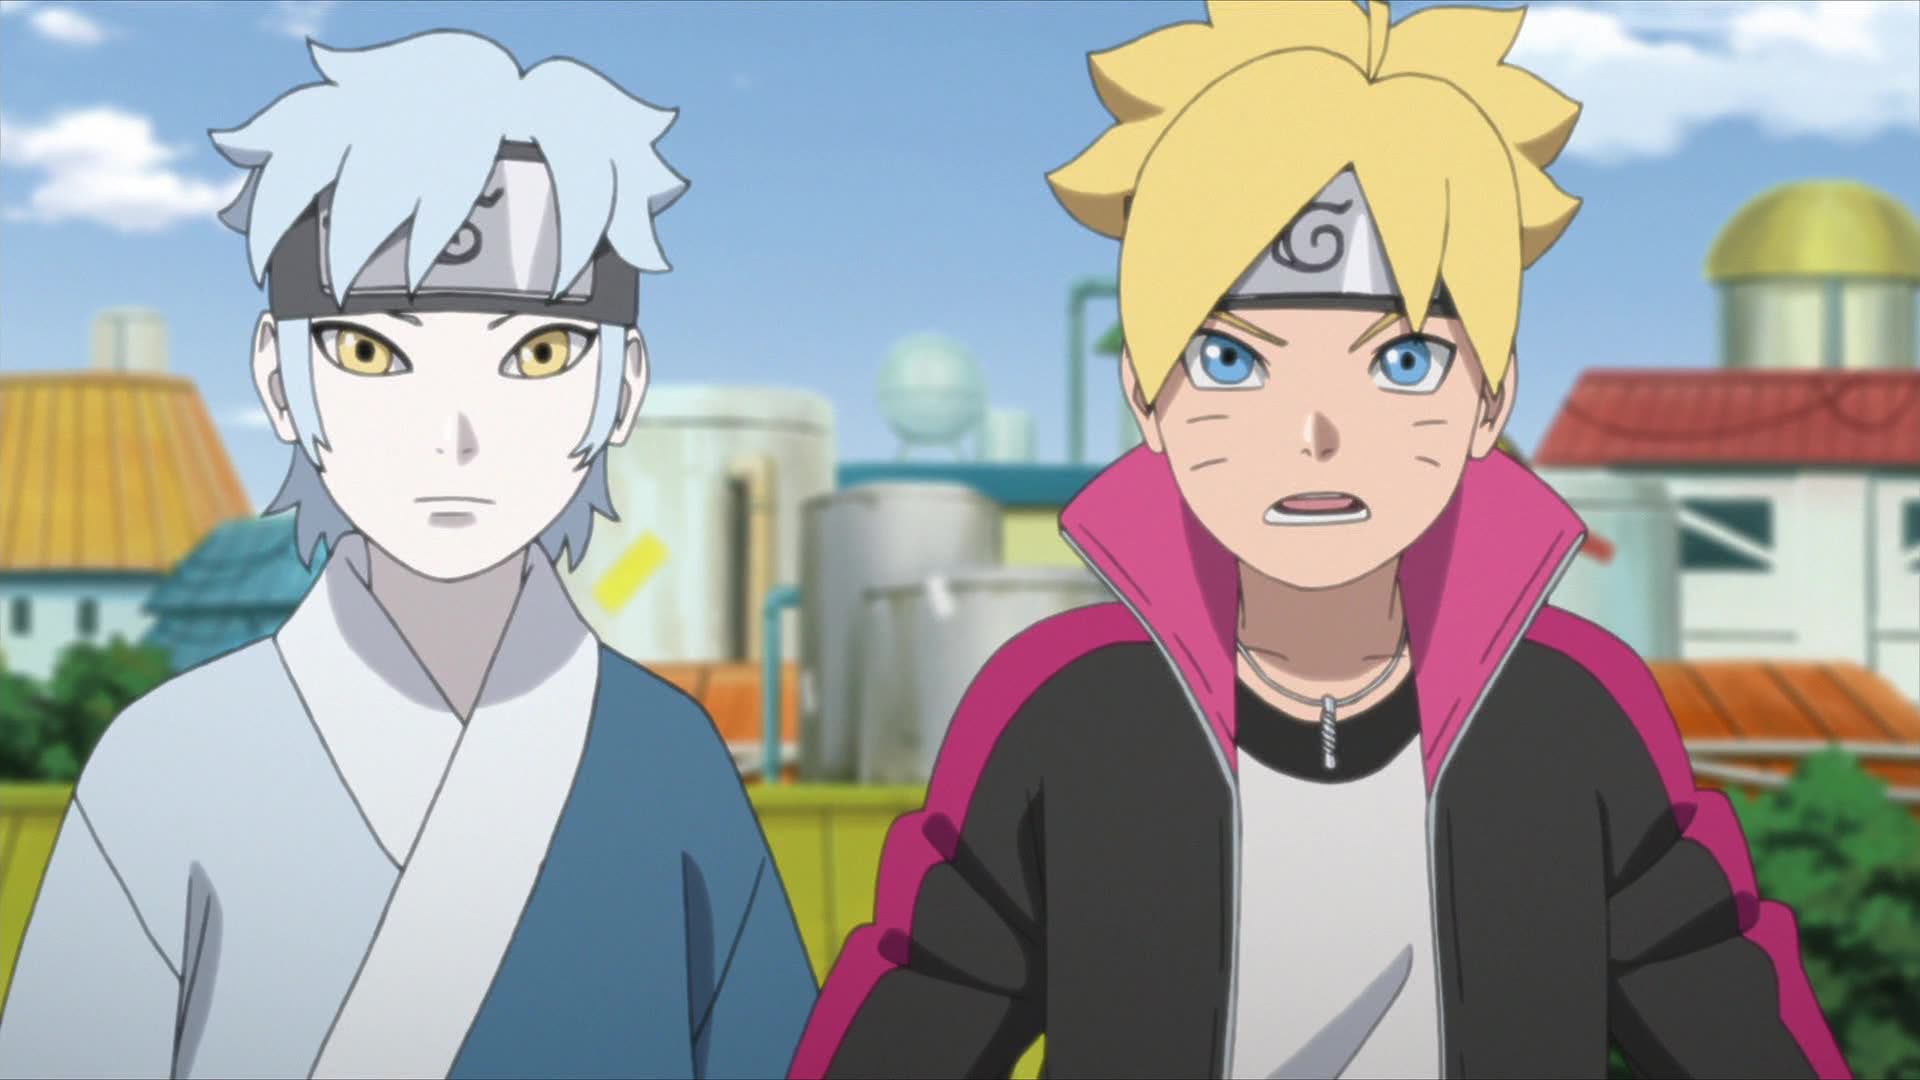 boruto 98 - ablessingtooneanother.org.